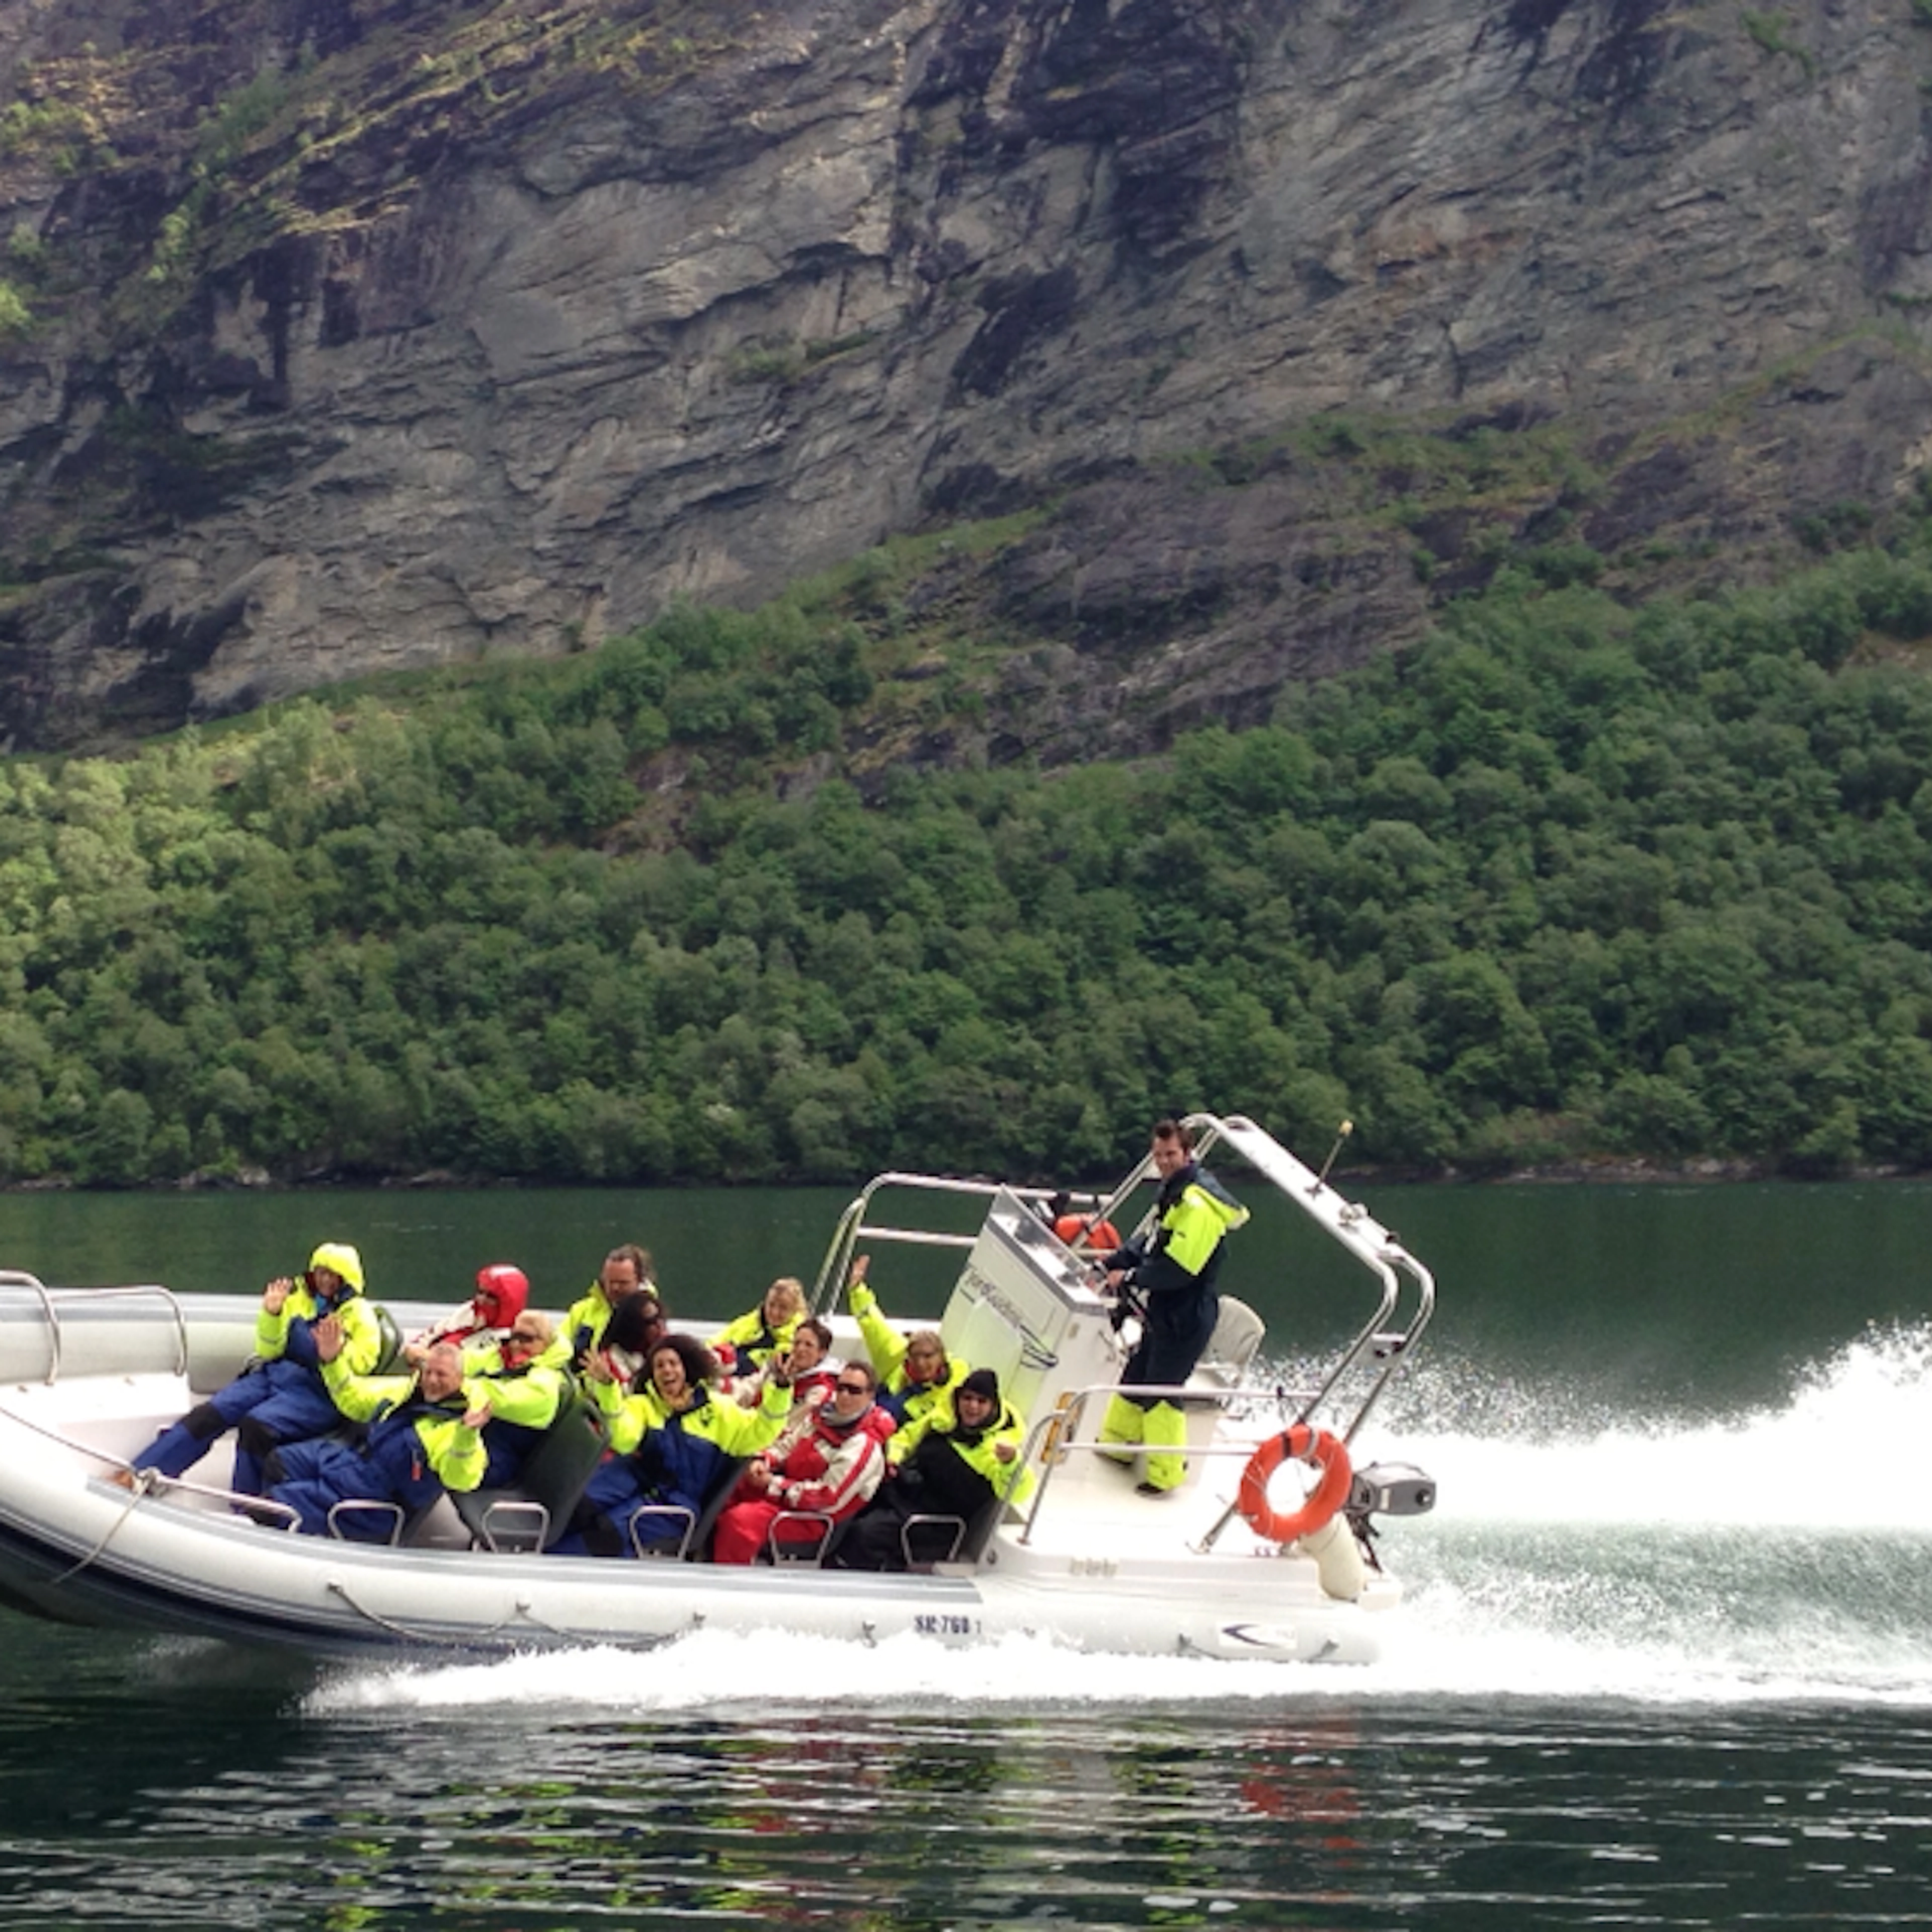 Activities in Geiranger - RIB boat trip on the Geirangerfjord, Geiranger, Norway